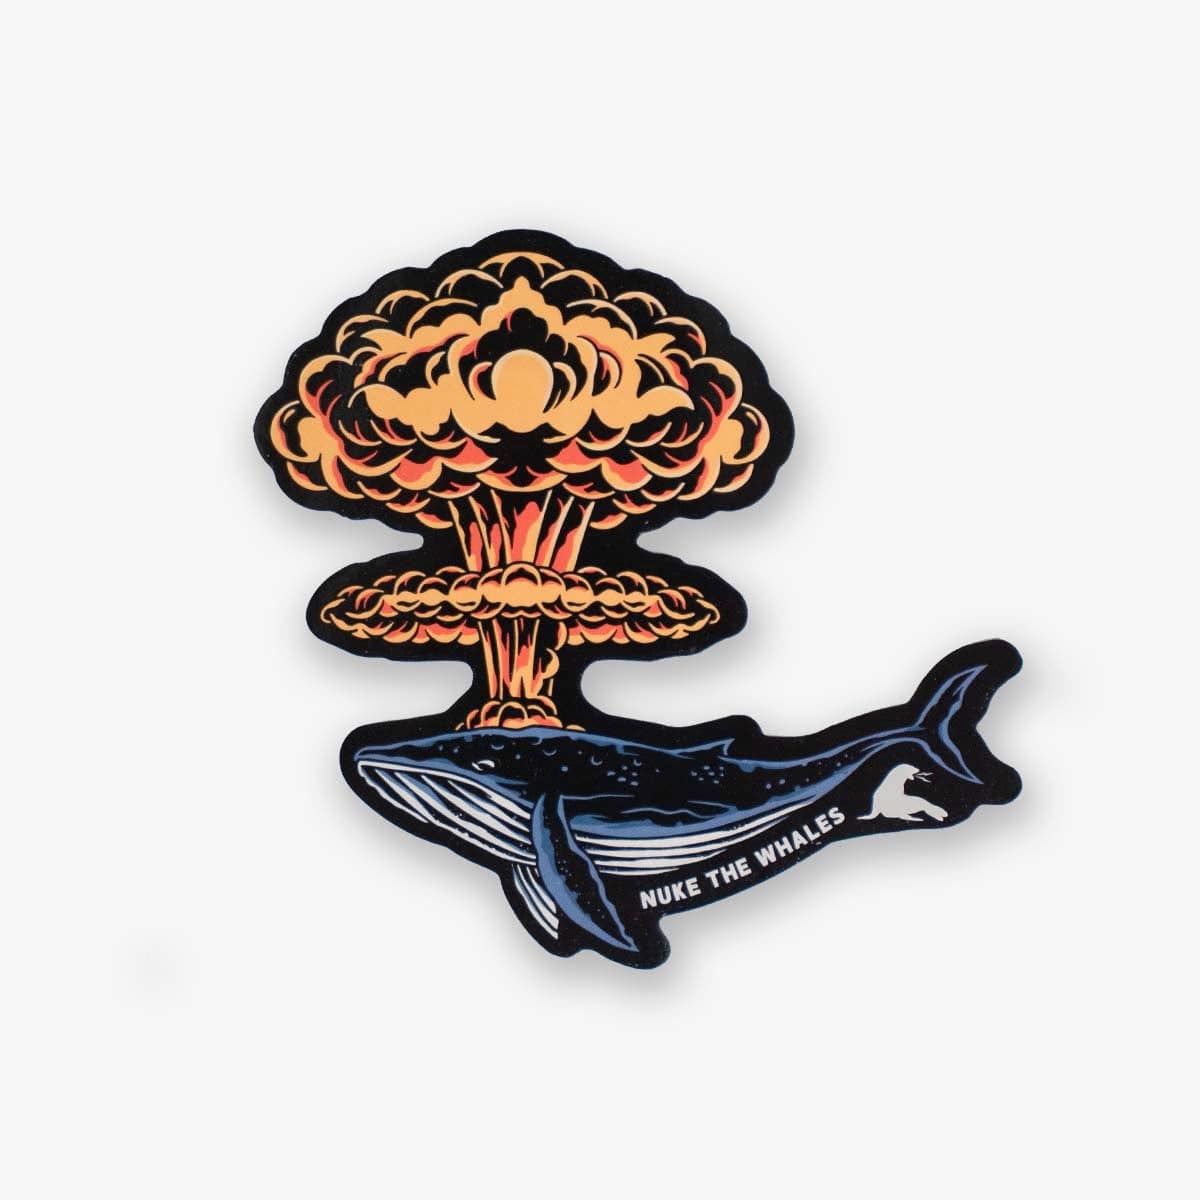 Nuke the Whales Sticker